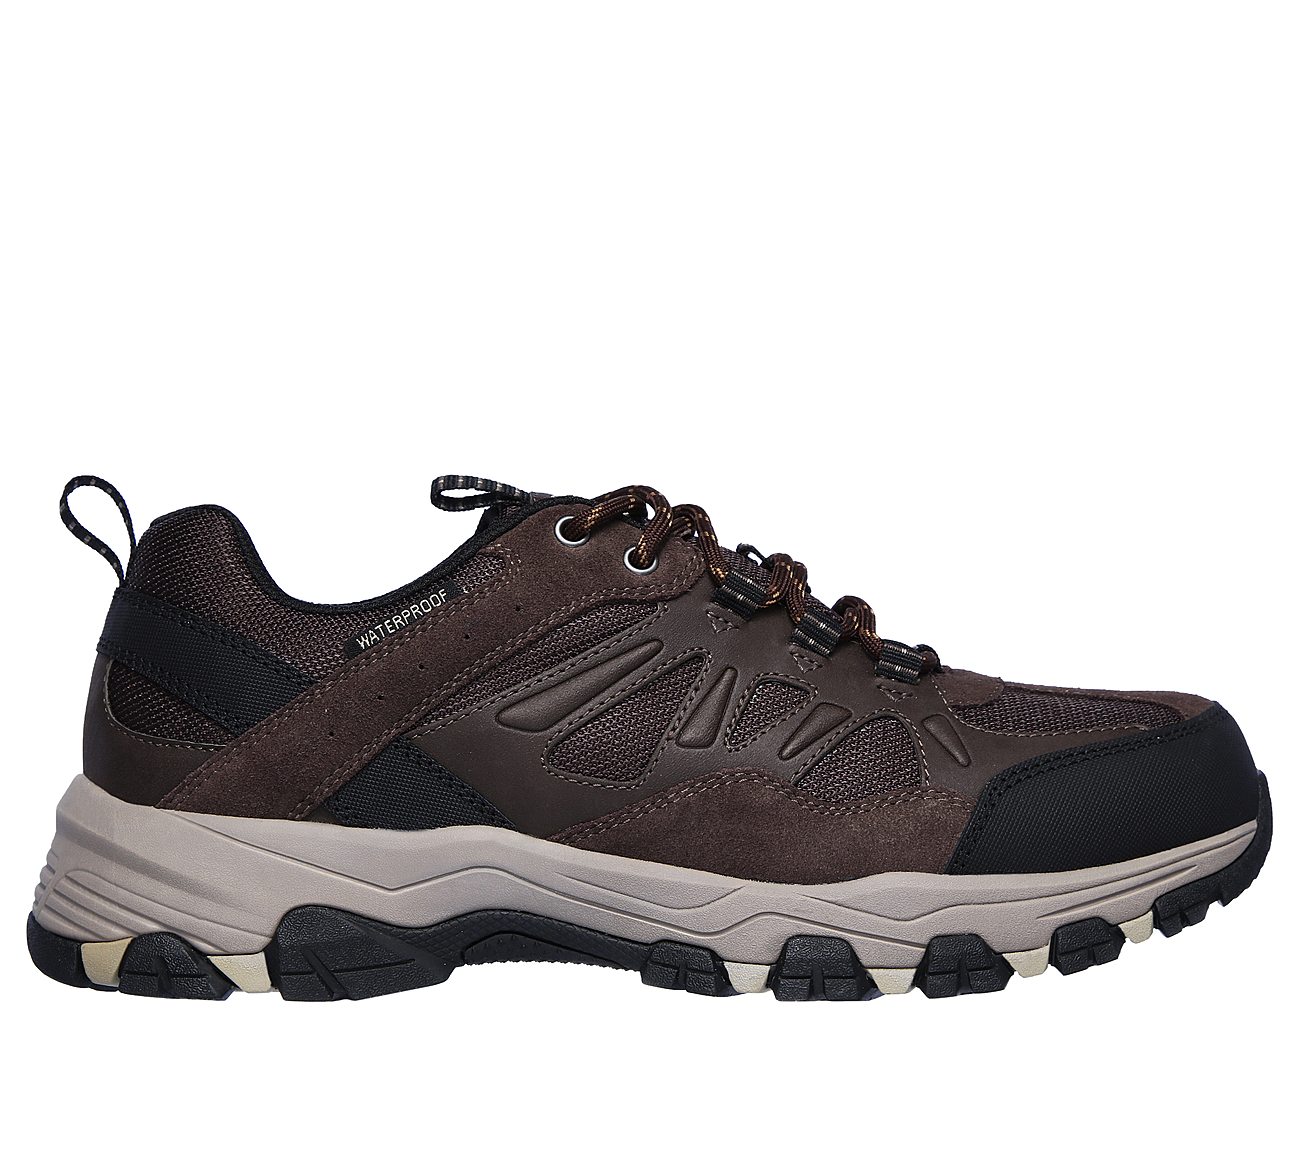 Buy SKECHERS Relaxed Fit: Selmen - Enago USA Casuals Shoes